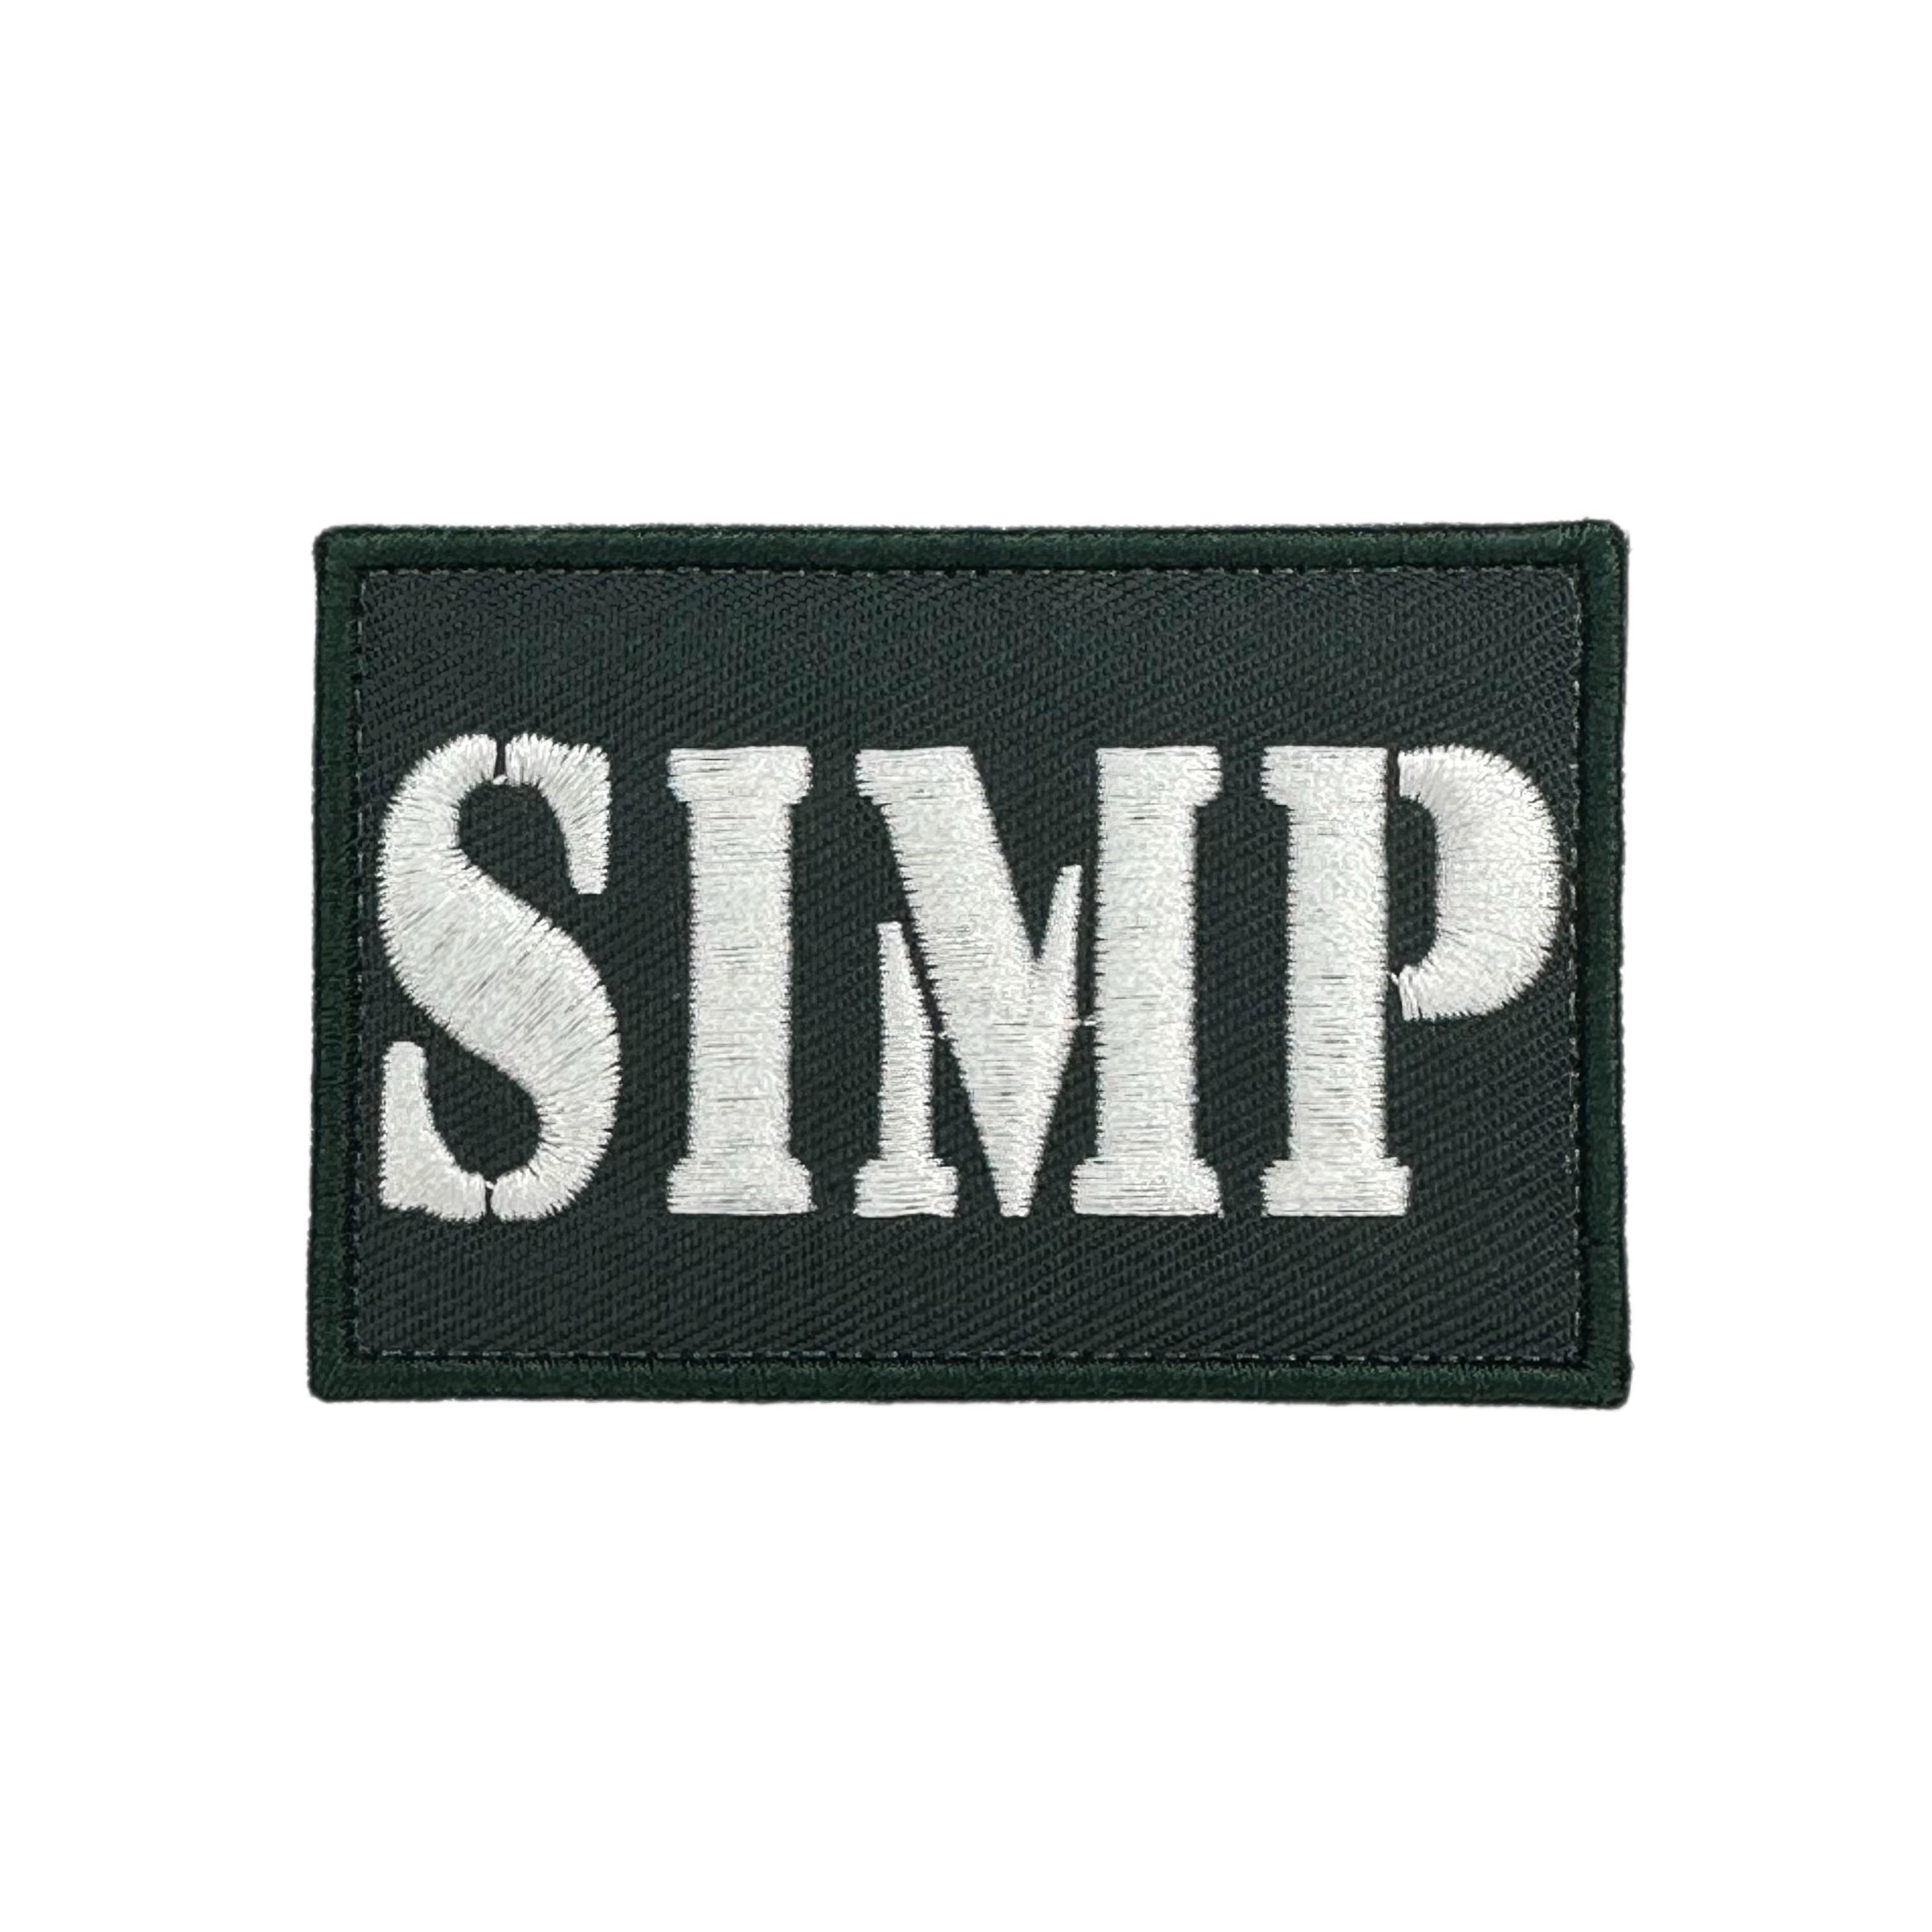 Simp Military Stamp Embroidered Morale Patch